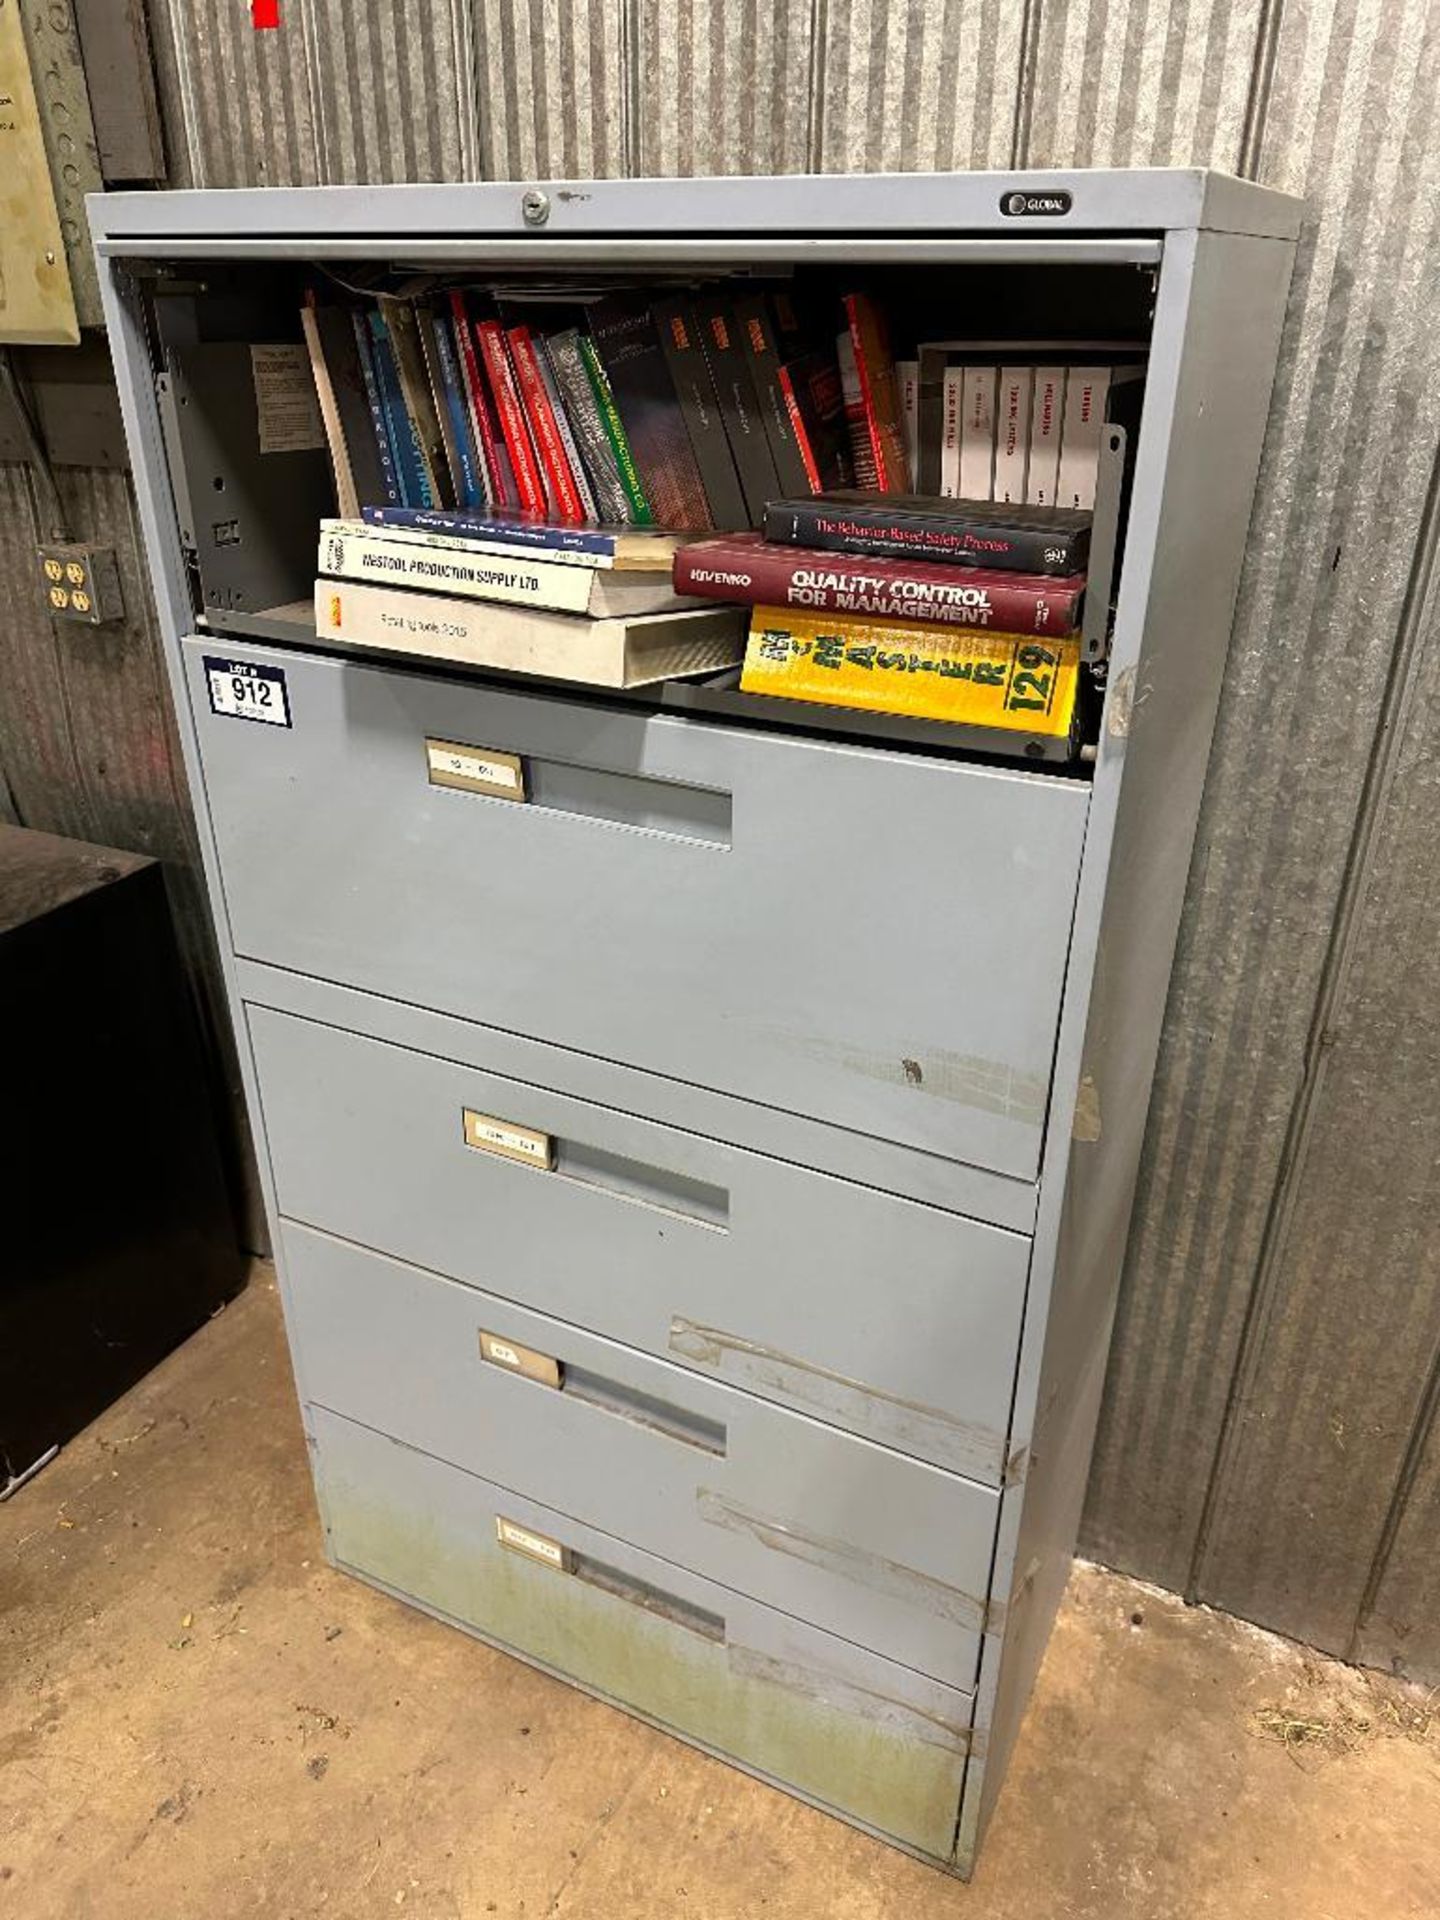 4-Drawer Lateral Filing Cabinet w/ Asst. Tool Catalogues, Manuals, etc. - Image 2 of 4